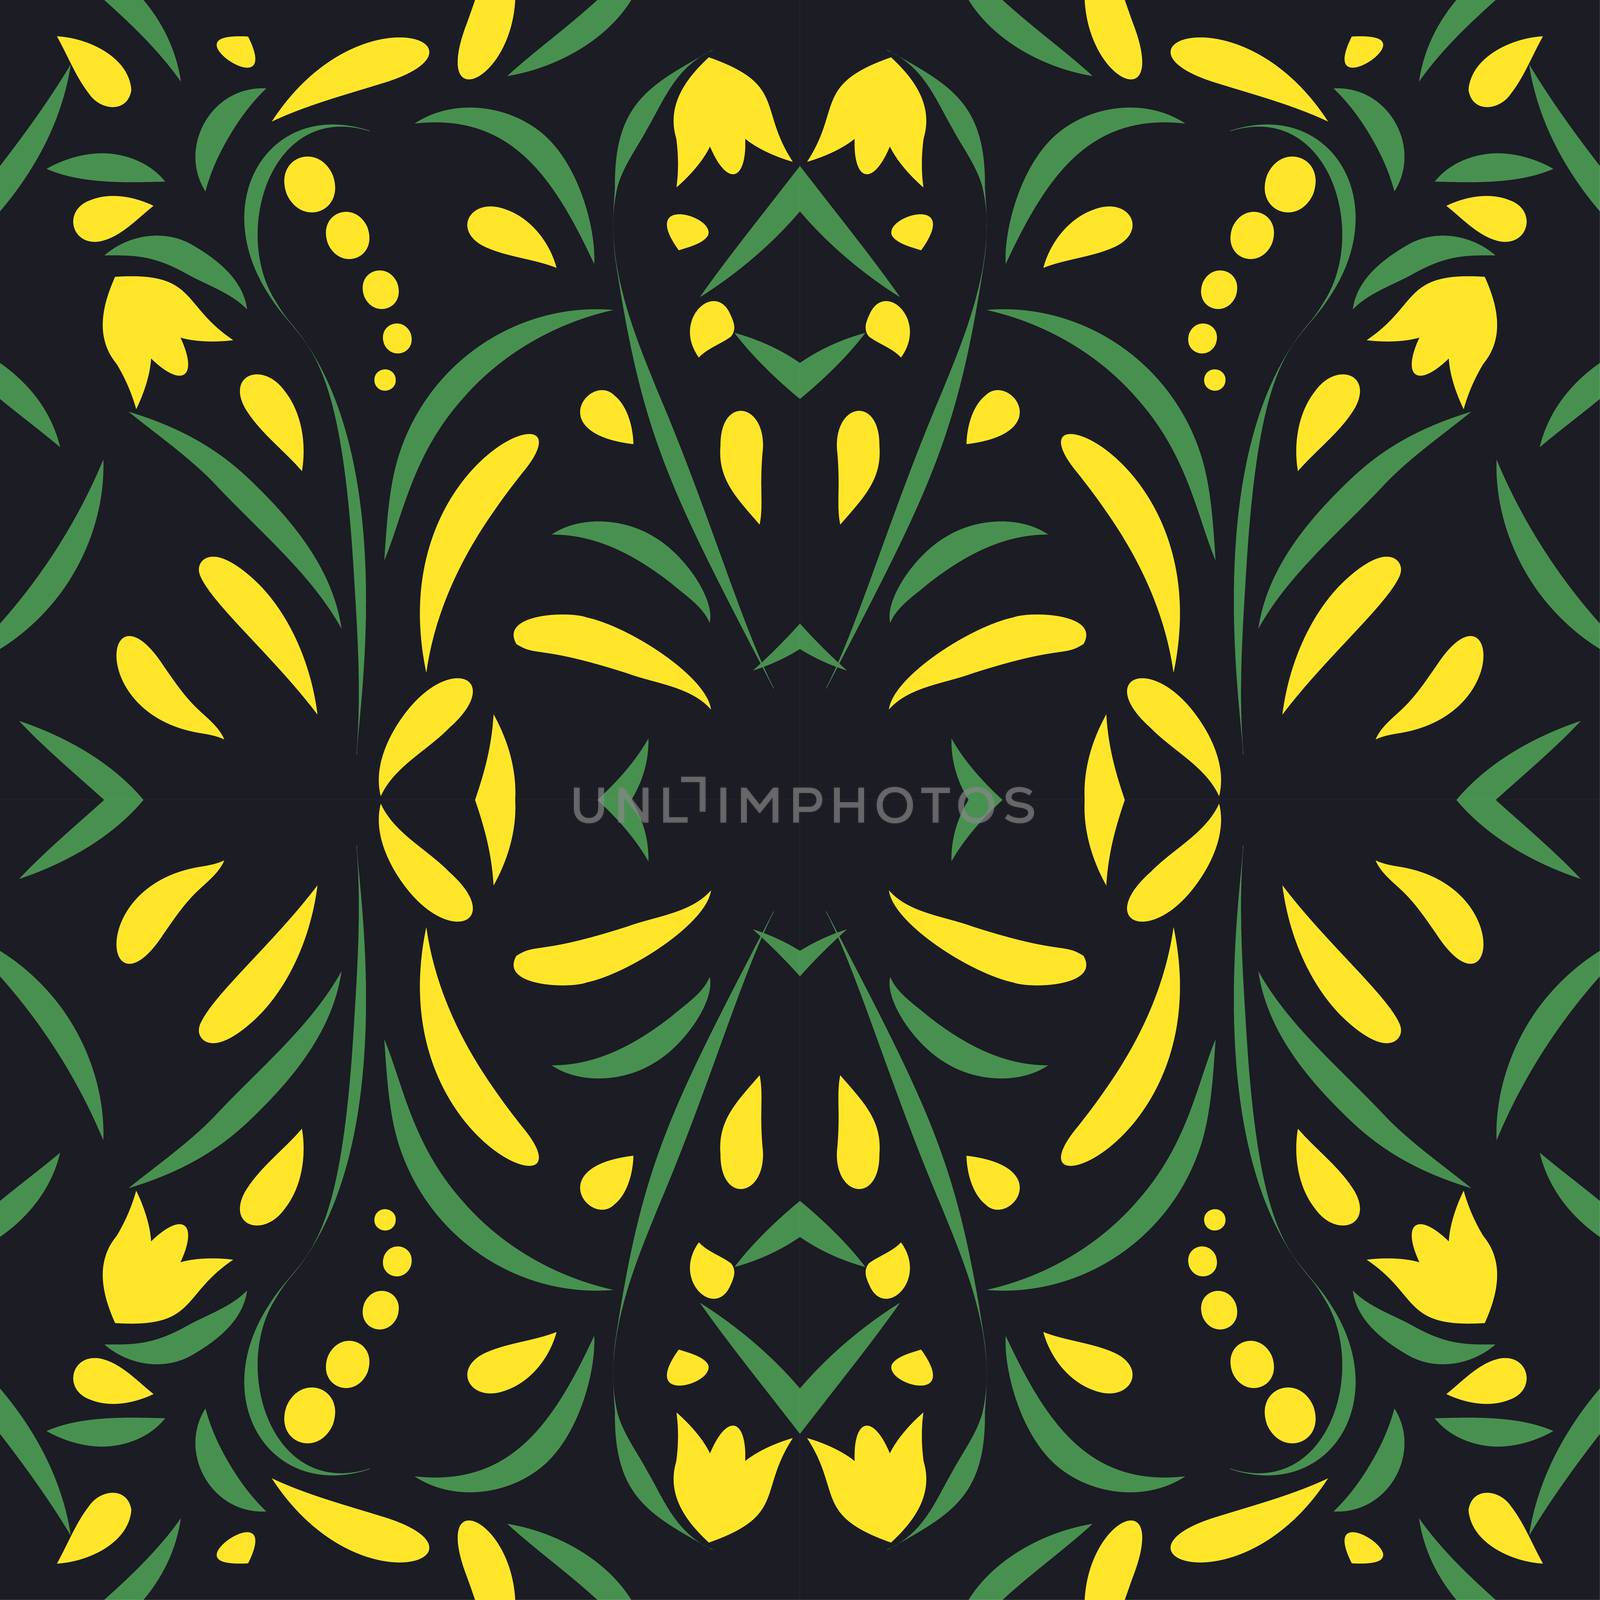 Traditional russian style flower seamless pattern vector. Decoration in khokhloma style on grunge canvas background